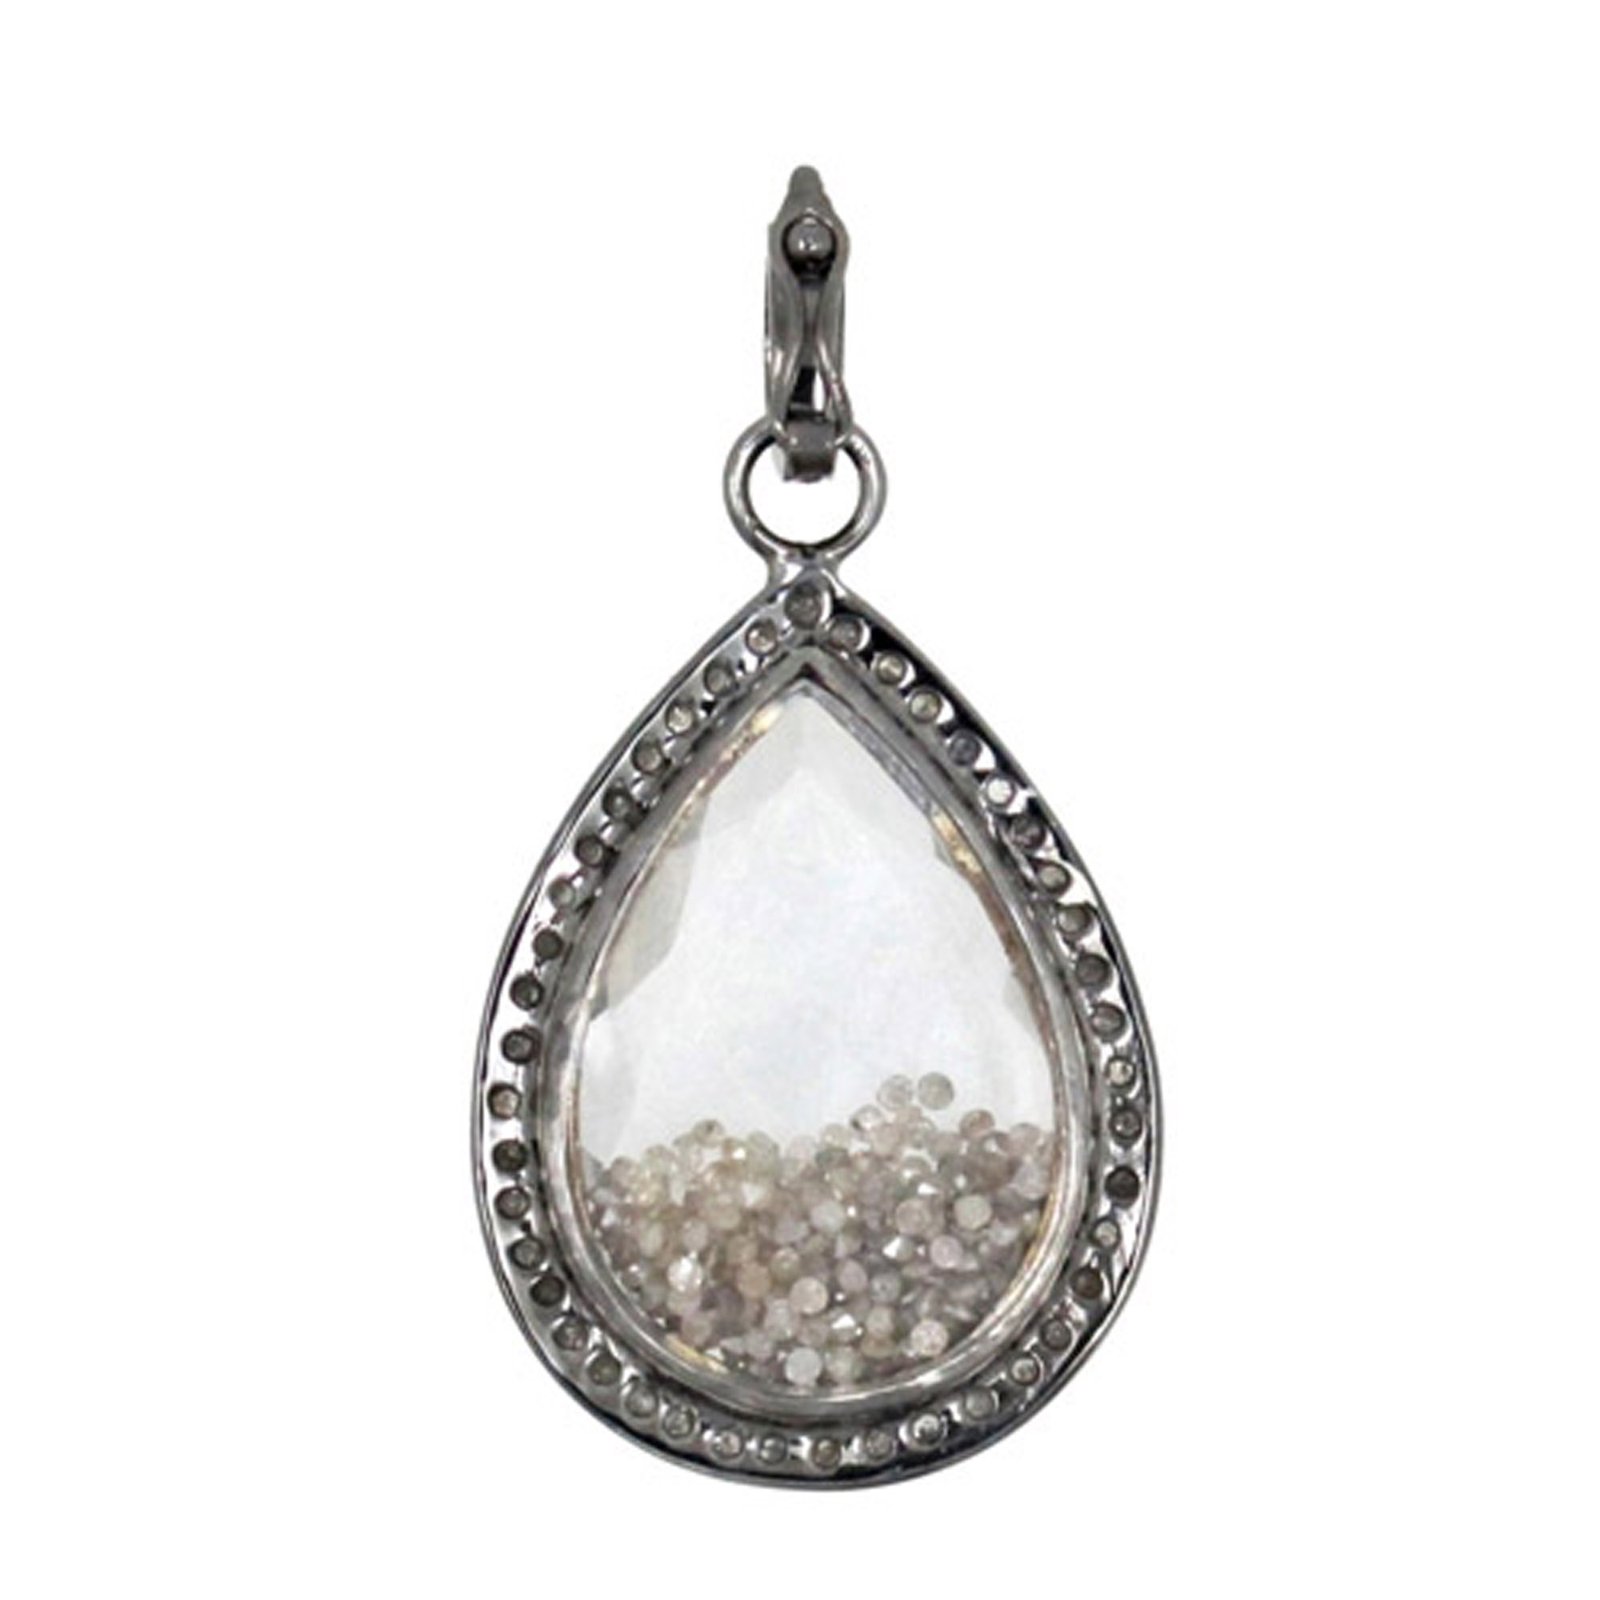 3.58ct natural diamond & 925 sterling silver crystal shaker pendant